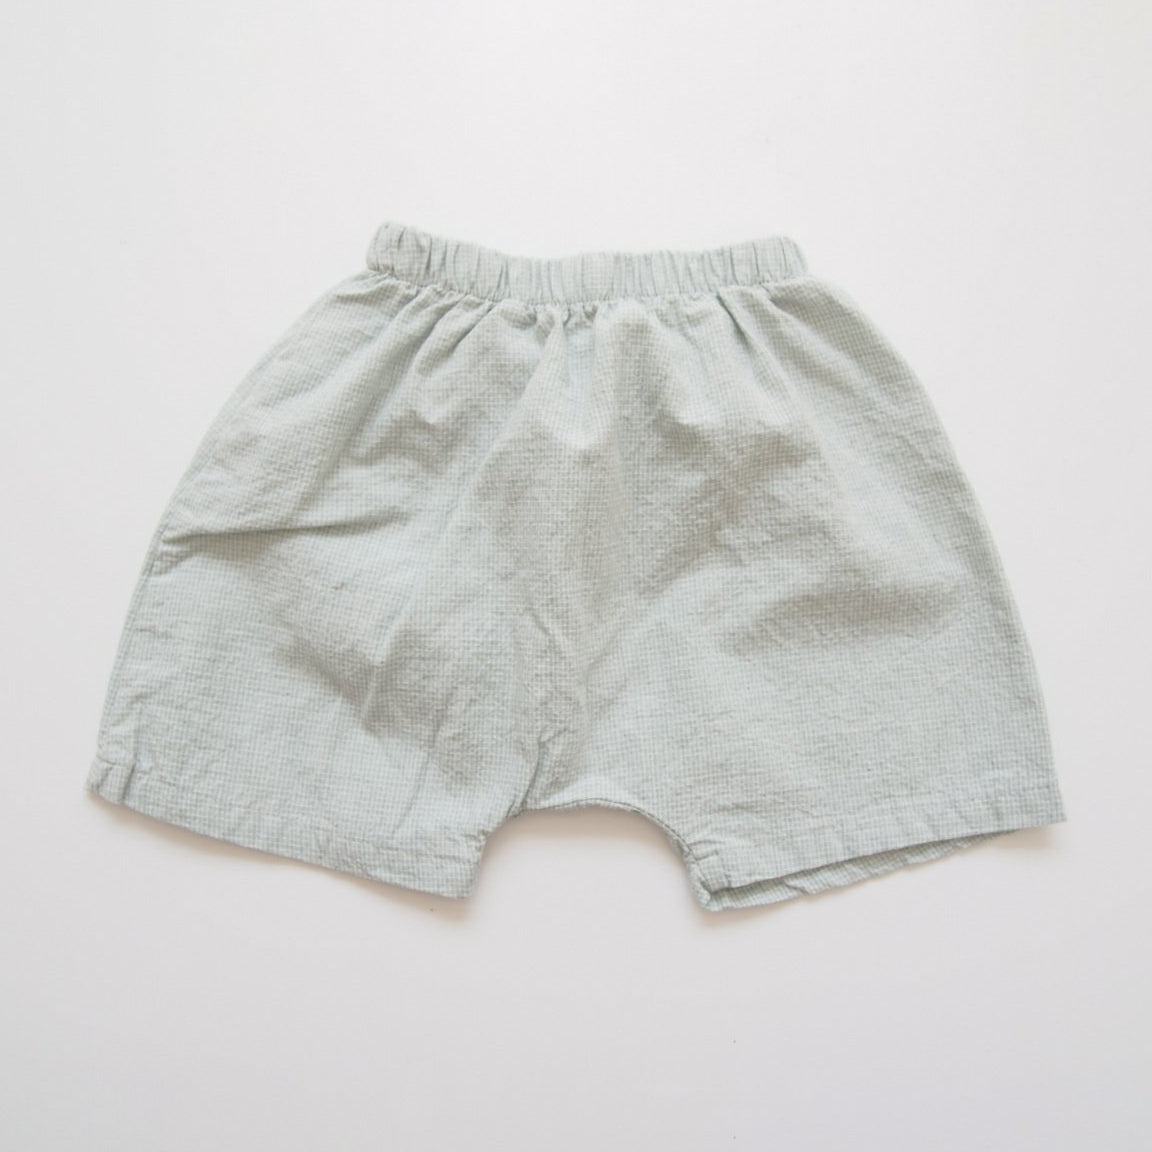 Baby Harem Short (0-6m) - Mint - AT NOON STORE